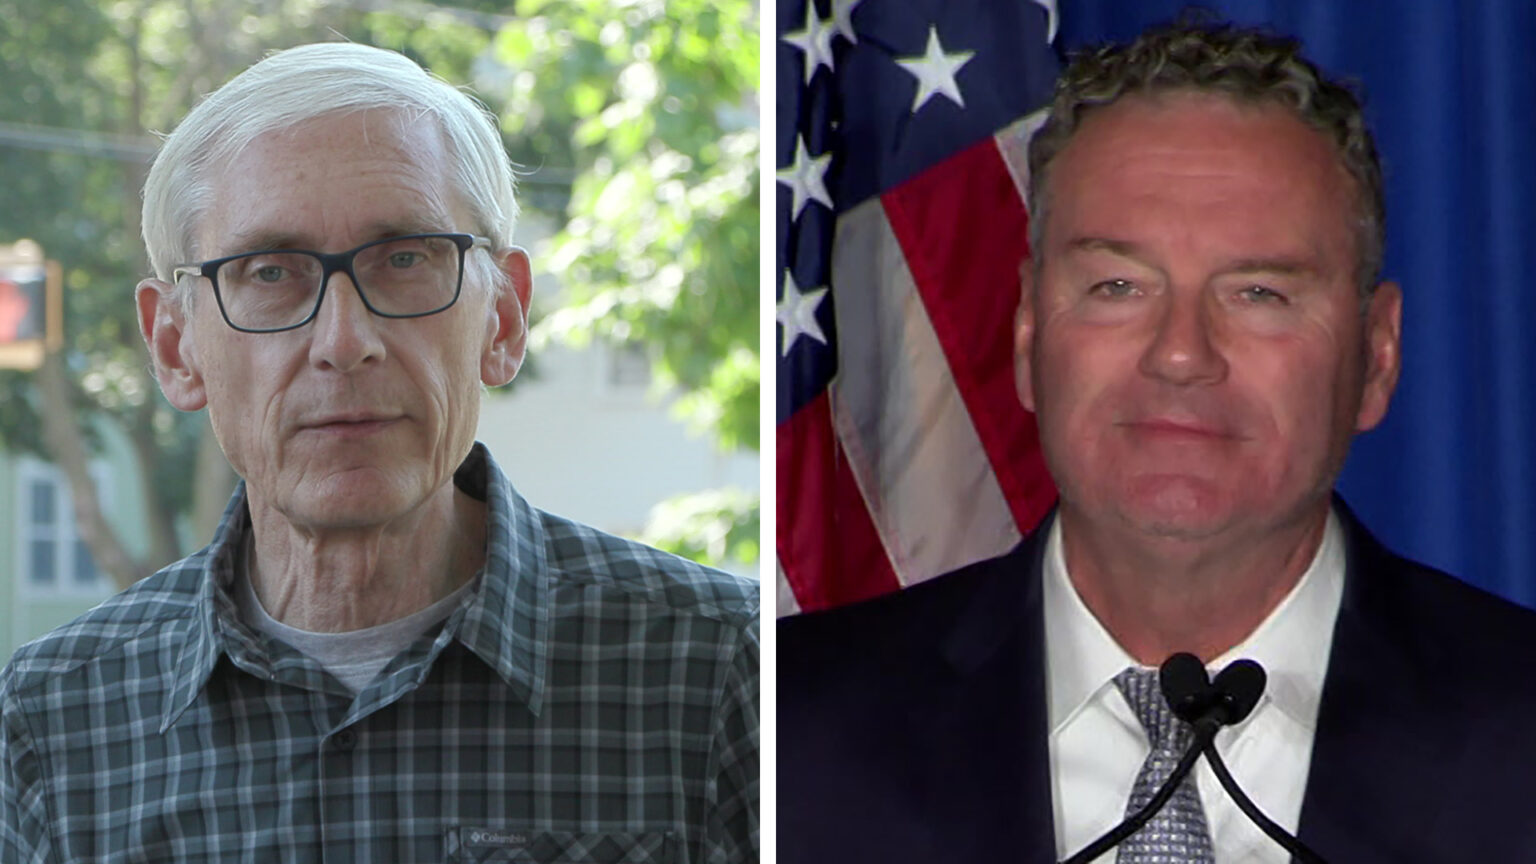 On the left half of a split-screen image, Tony Evers speaks to reporters outdoors with a street sign and tree in the background, while on the right half, Tim Michels speaks into microphones with a U.S. flag in the background.